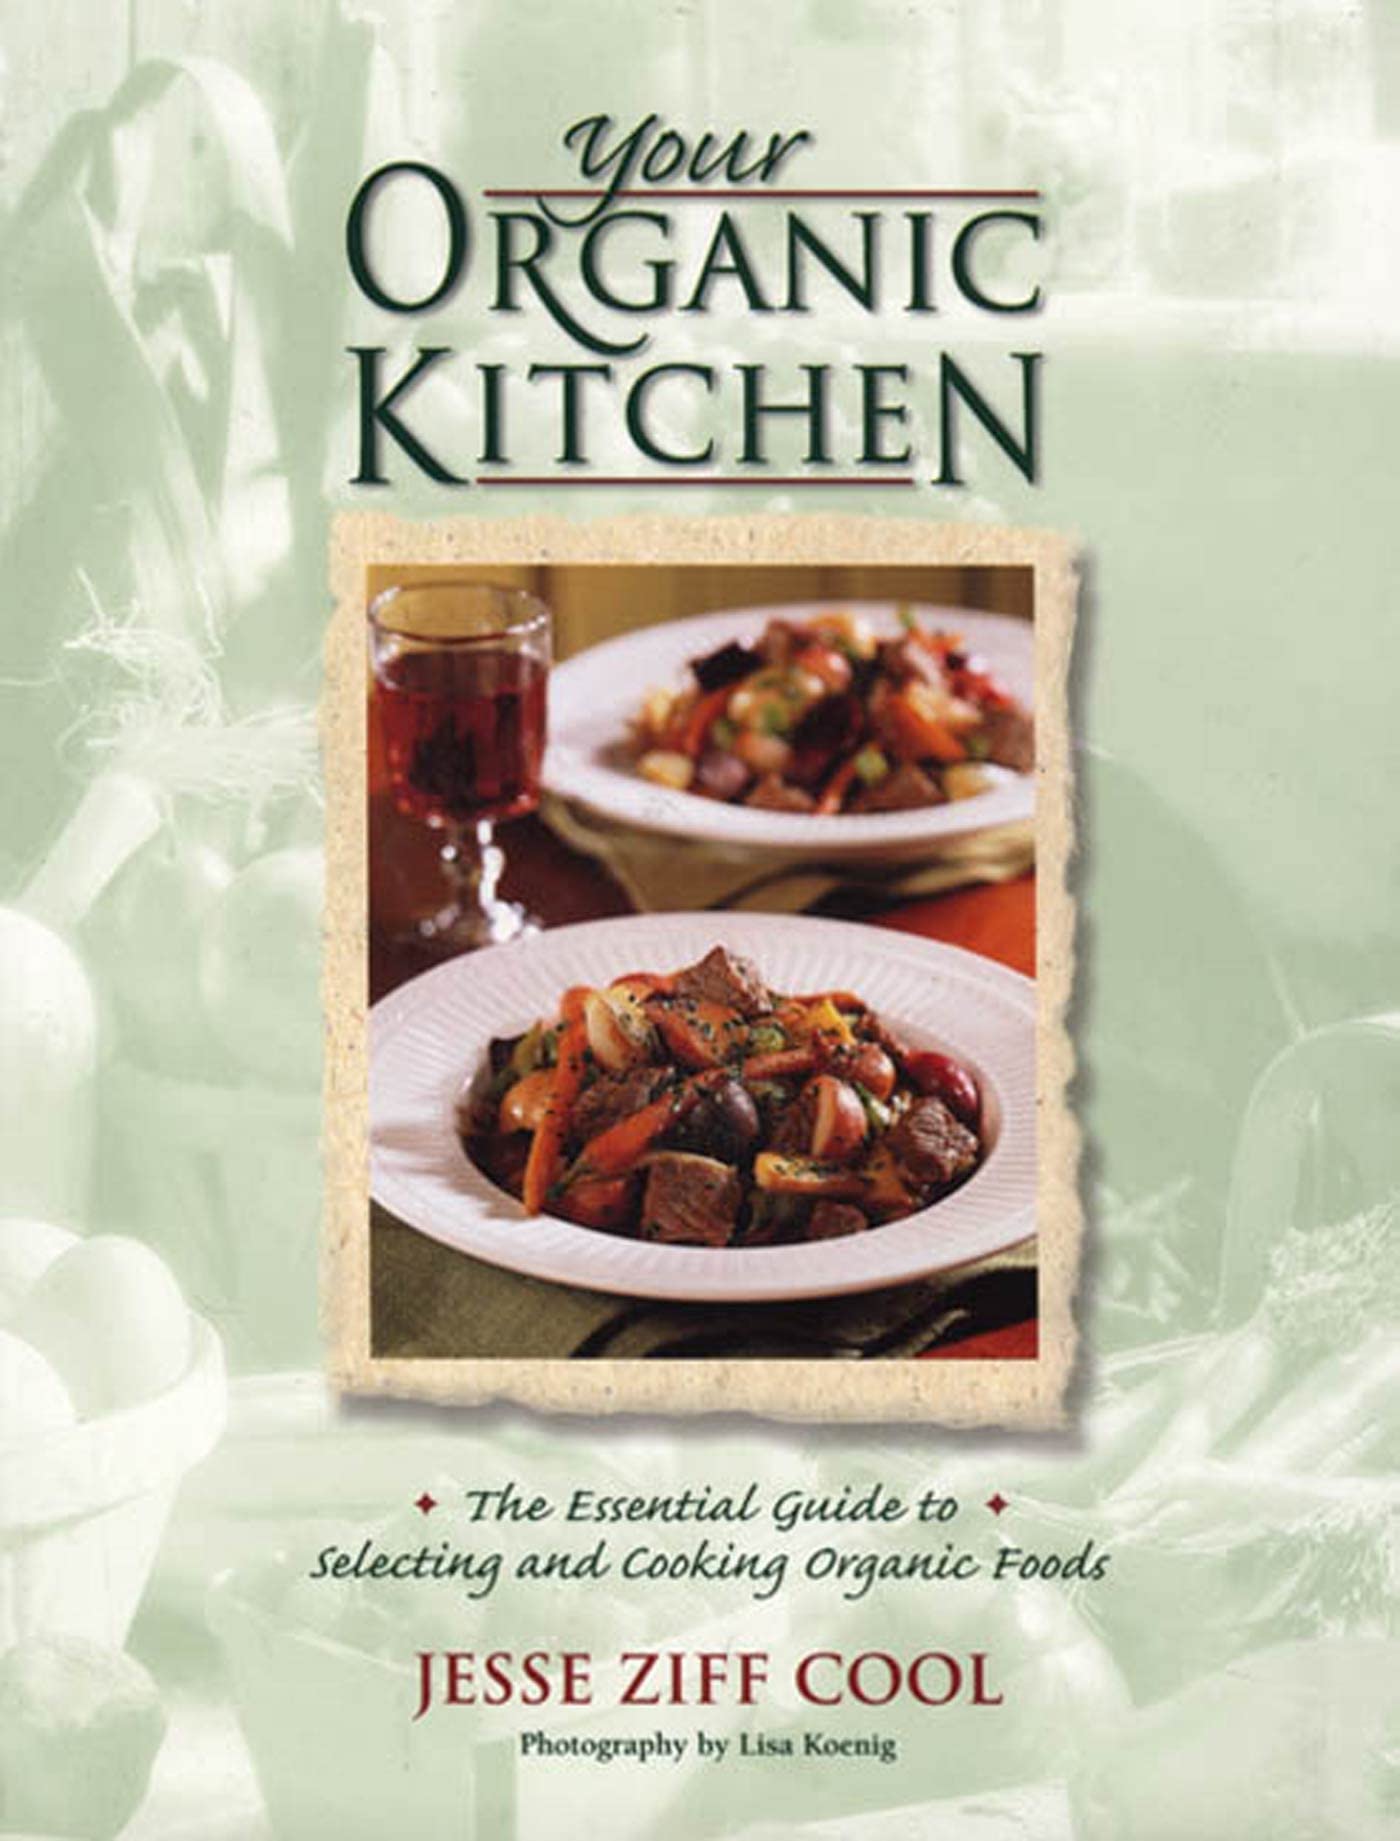 Livre ISBN 1579546625 Your Organic Kitchen: The Essential Guide to Selecting and Cooking Organic Foods (Jesse Ziff Cool)